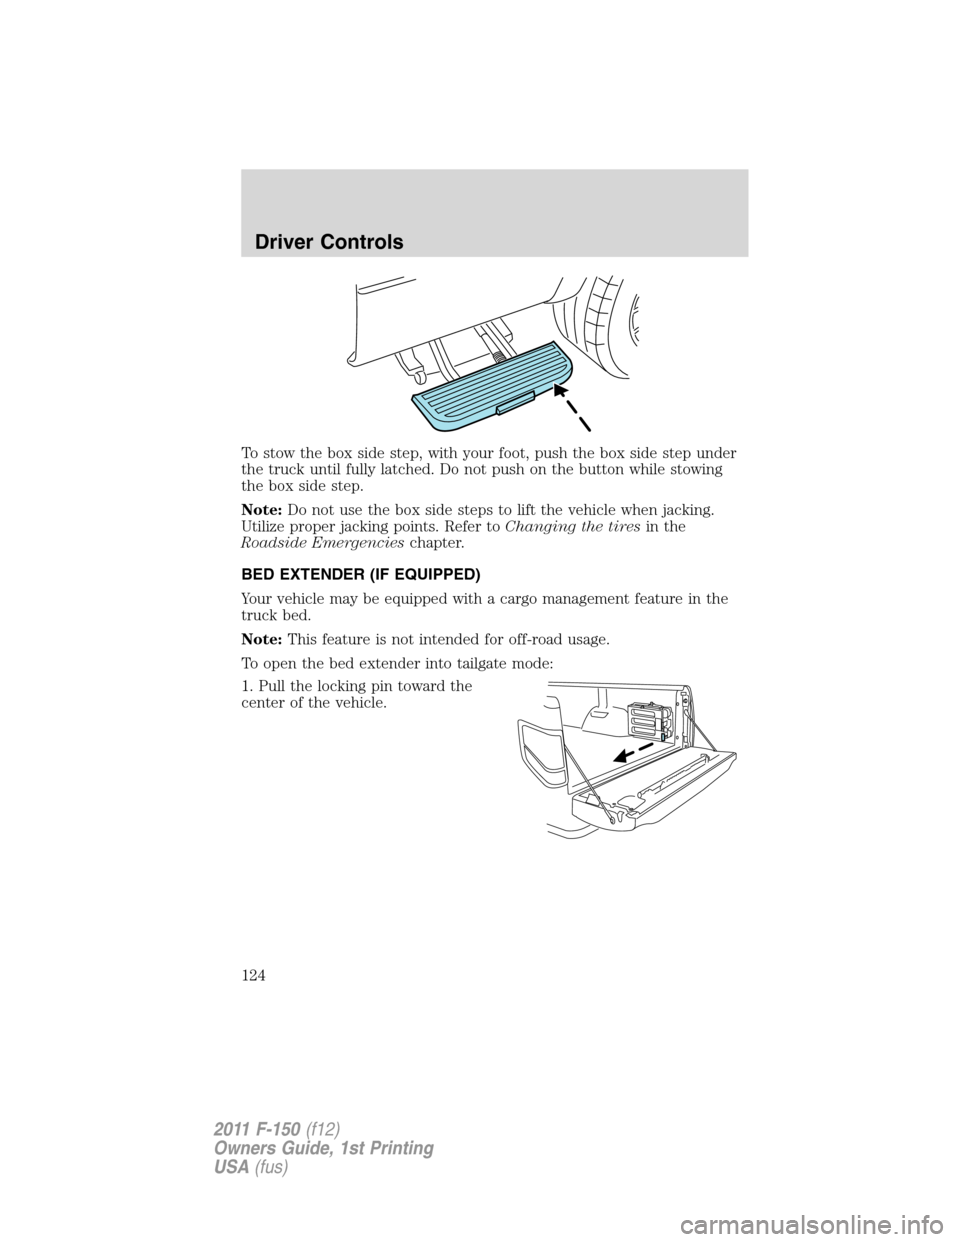 FORD F150 2011 12.G Owners Manual To stow the box side step, with your foot, push the box side step under
the truck until fully latched. Do not push on the button while stowing
the box side step.
Note:Do not use the box side steps to 